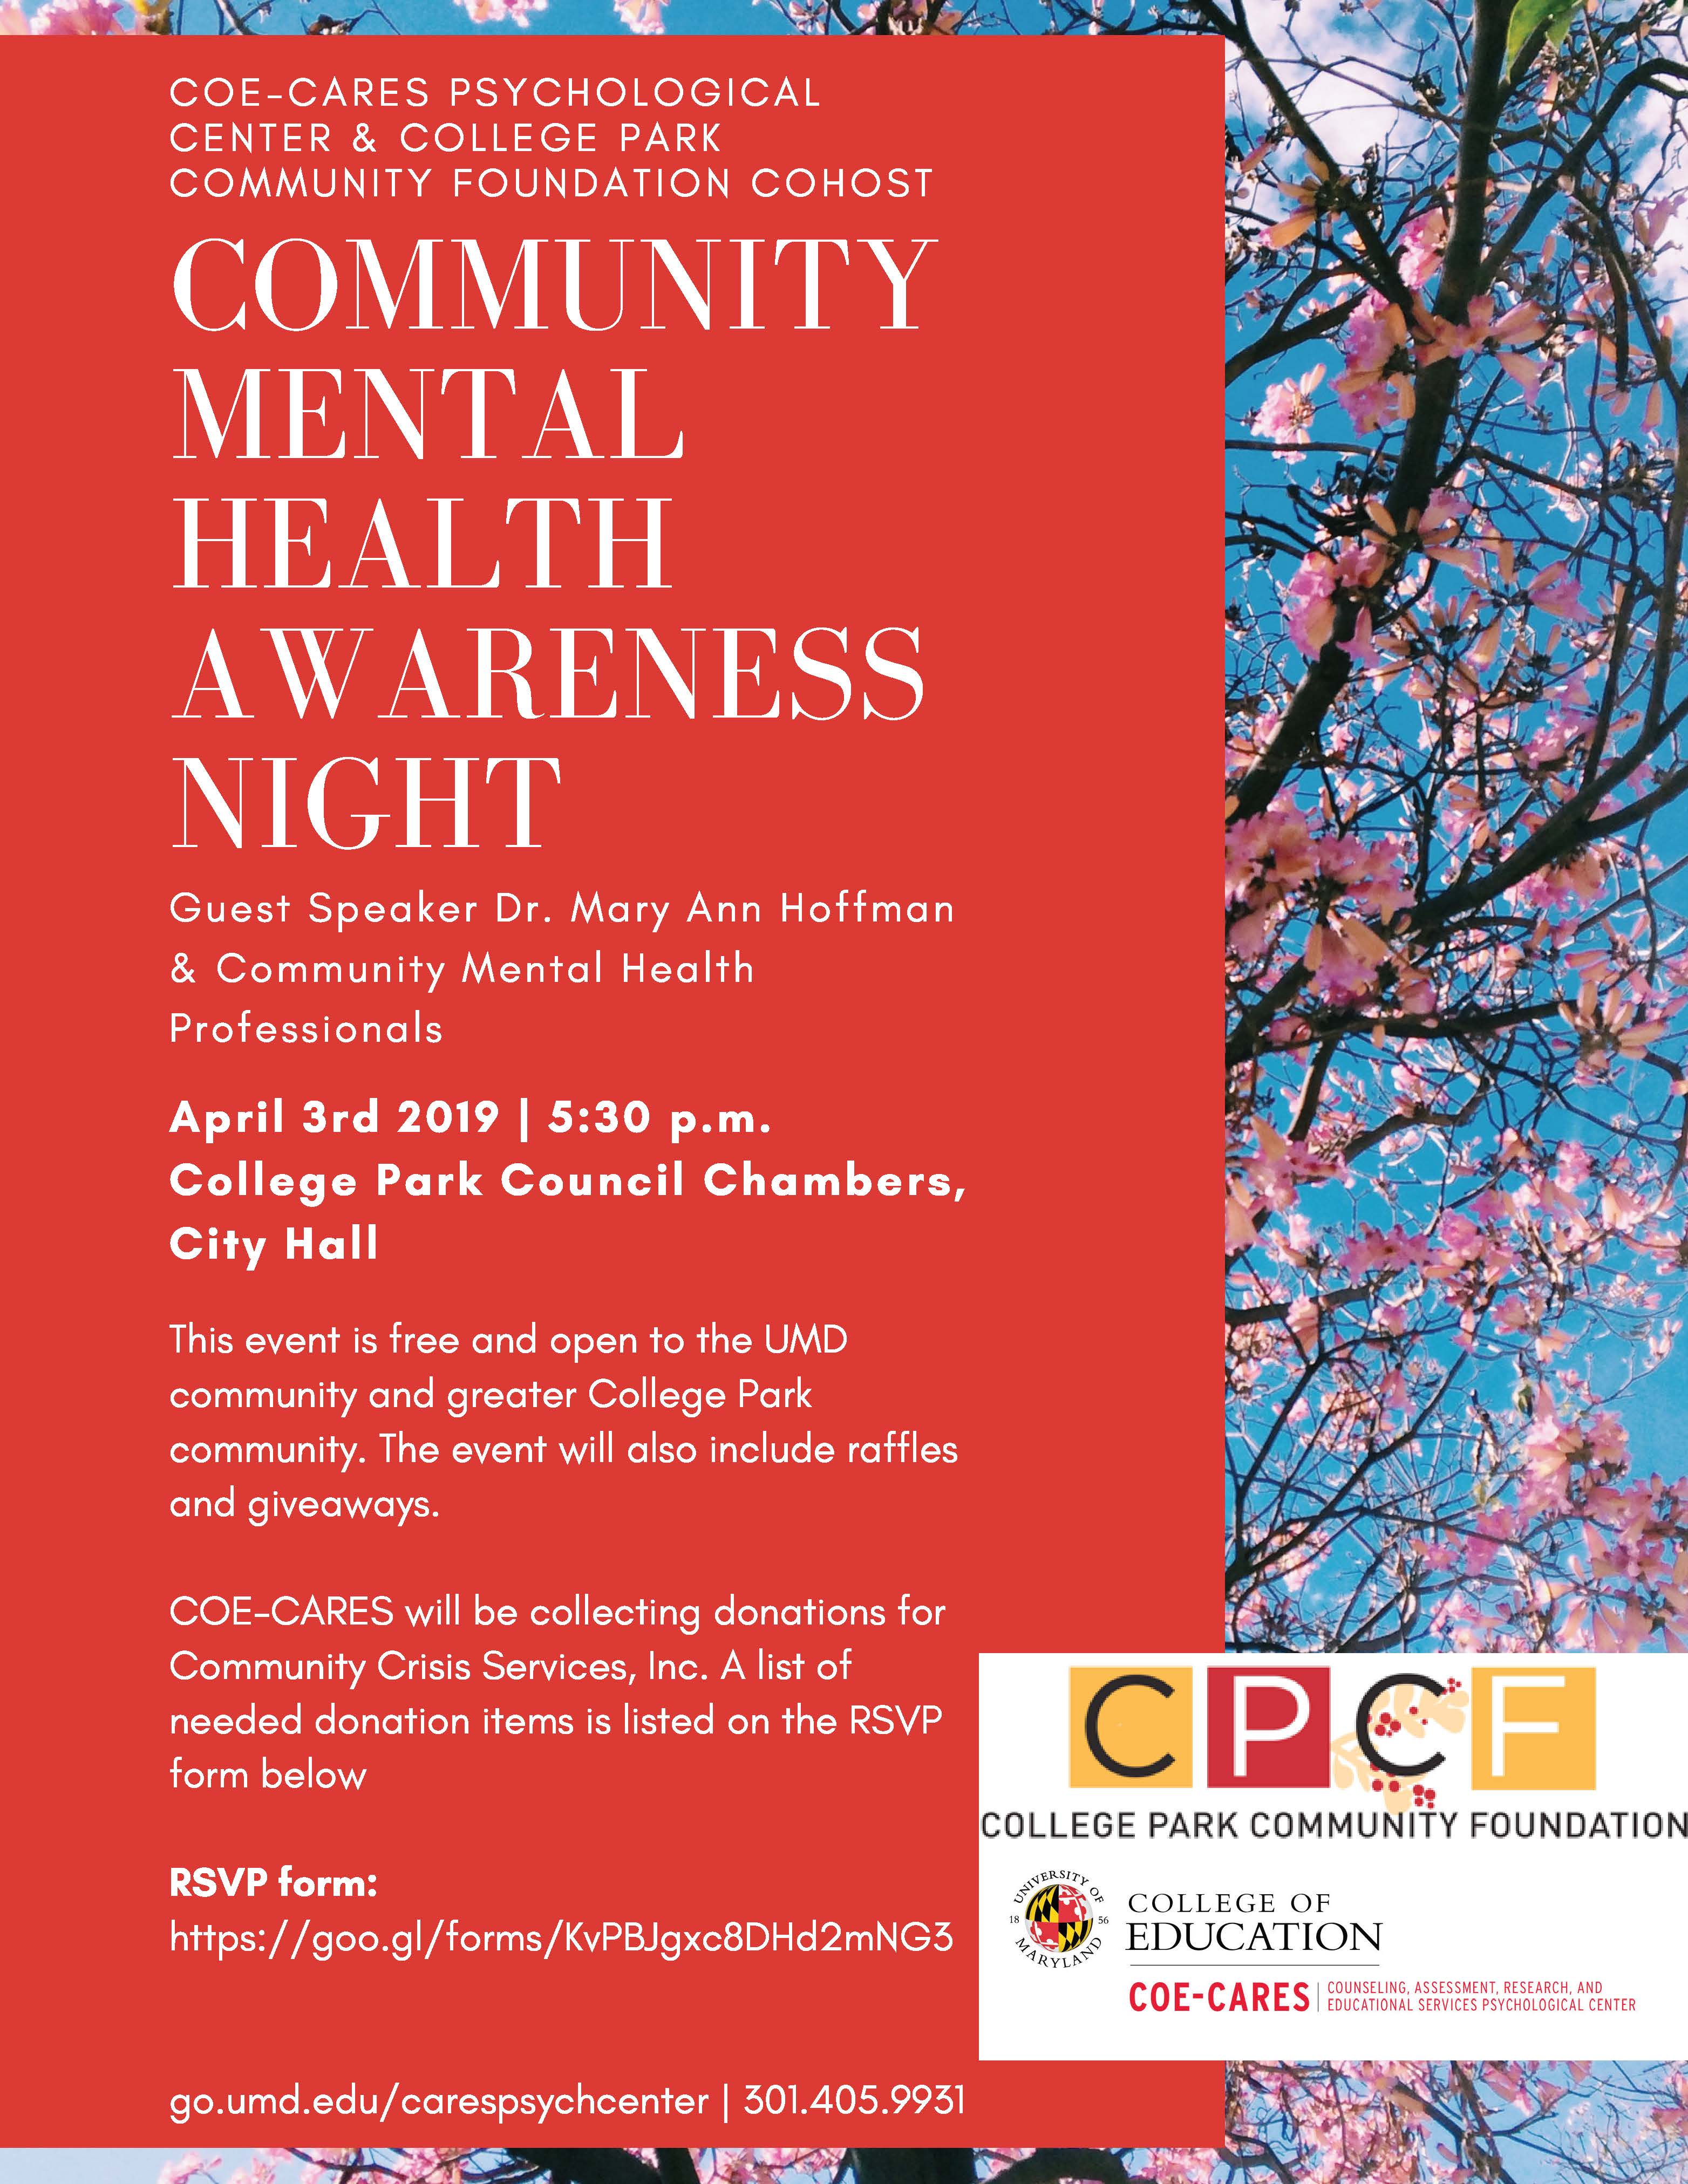 Community Mental Health Awareness Night, Date, Description, Location and Speakers 